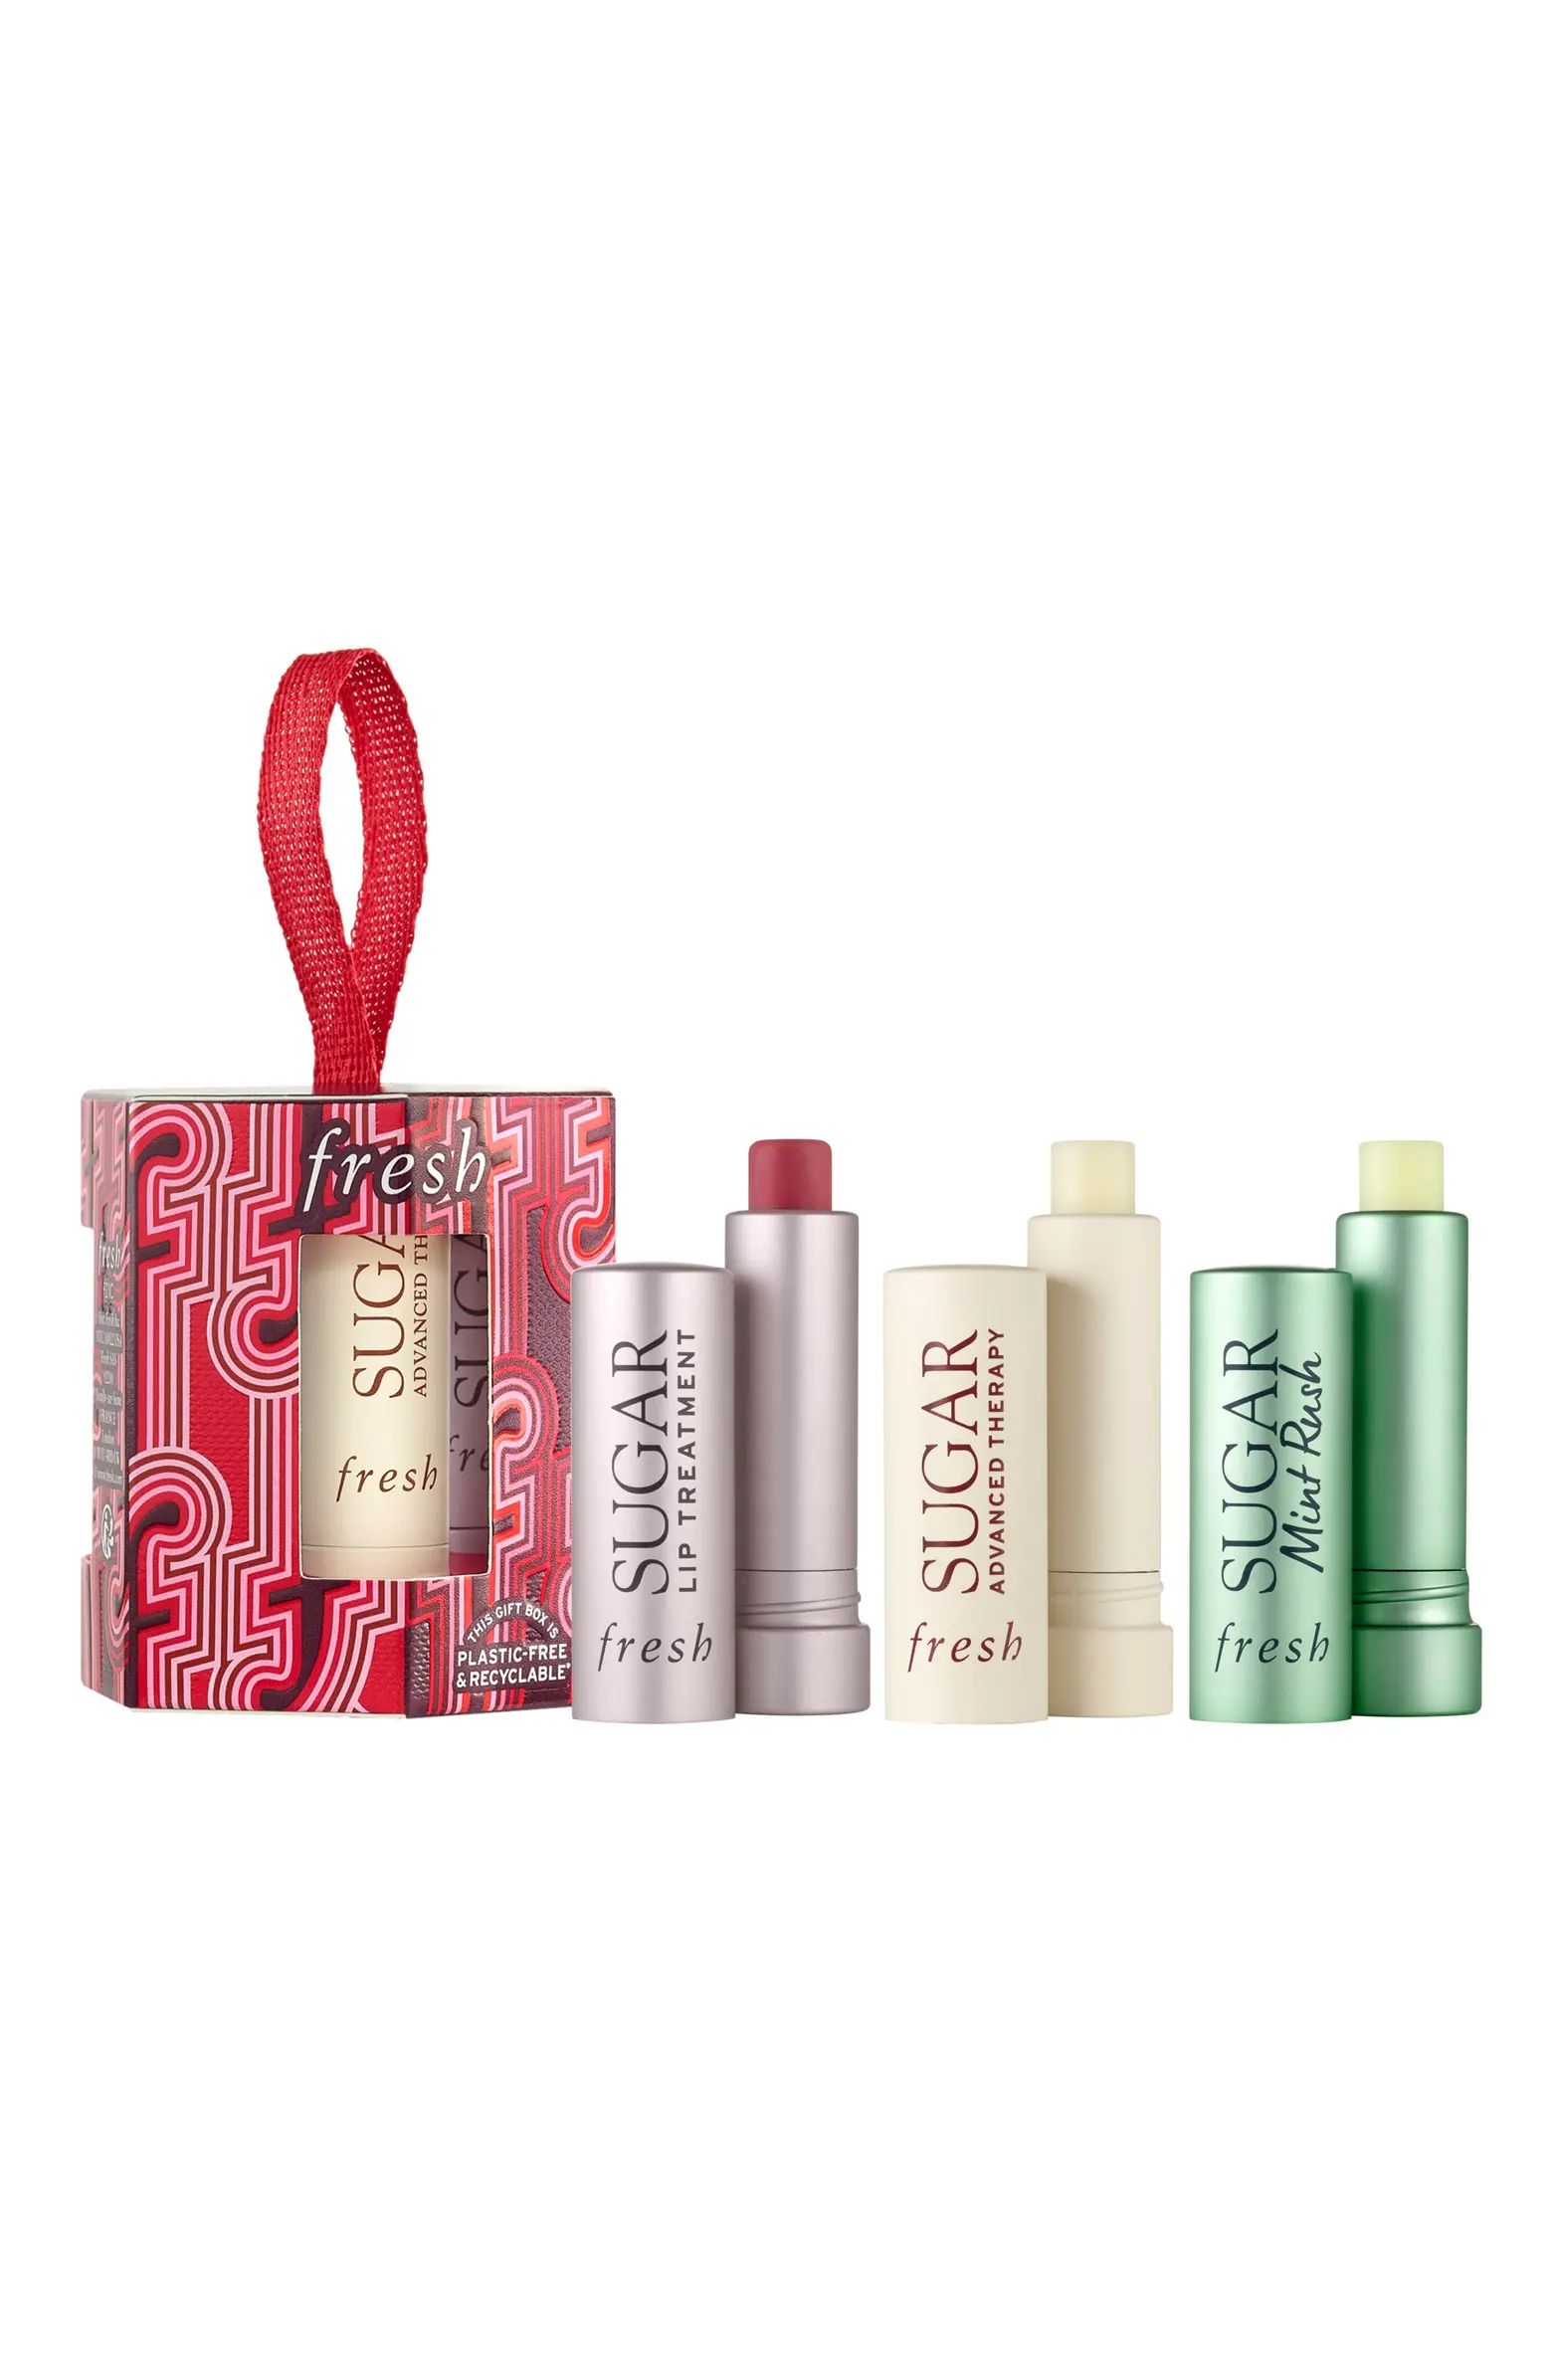 Tint & Treat Lip Care Set (Limited Edition) $40 Value | Nordstrom